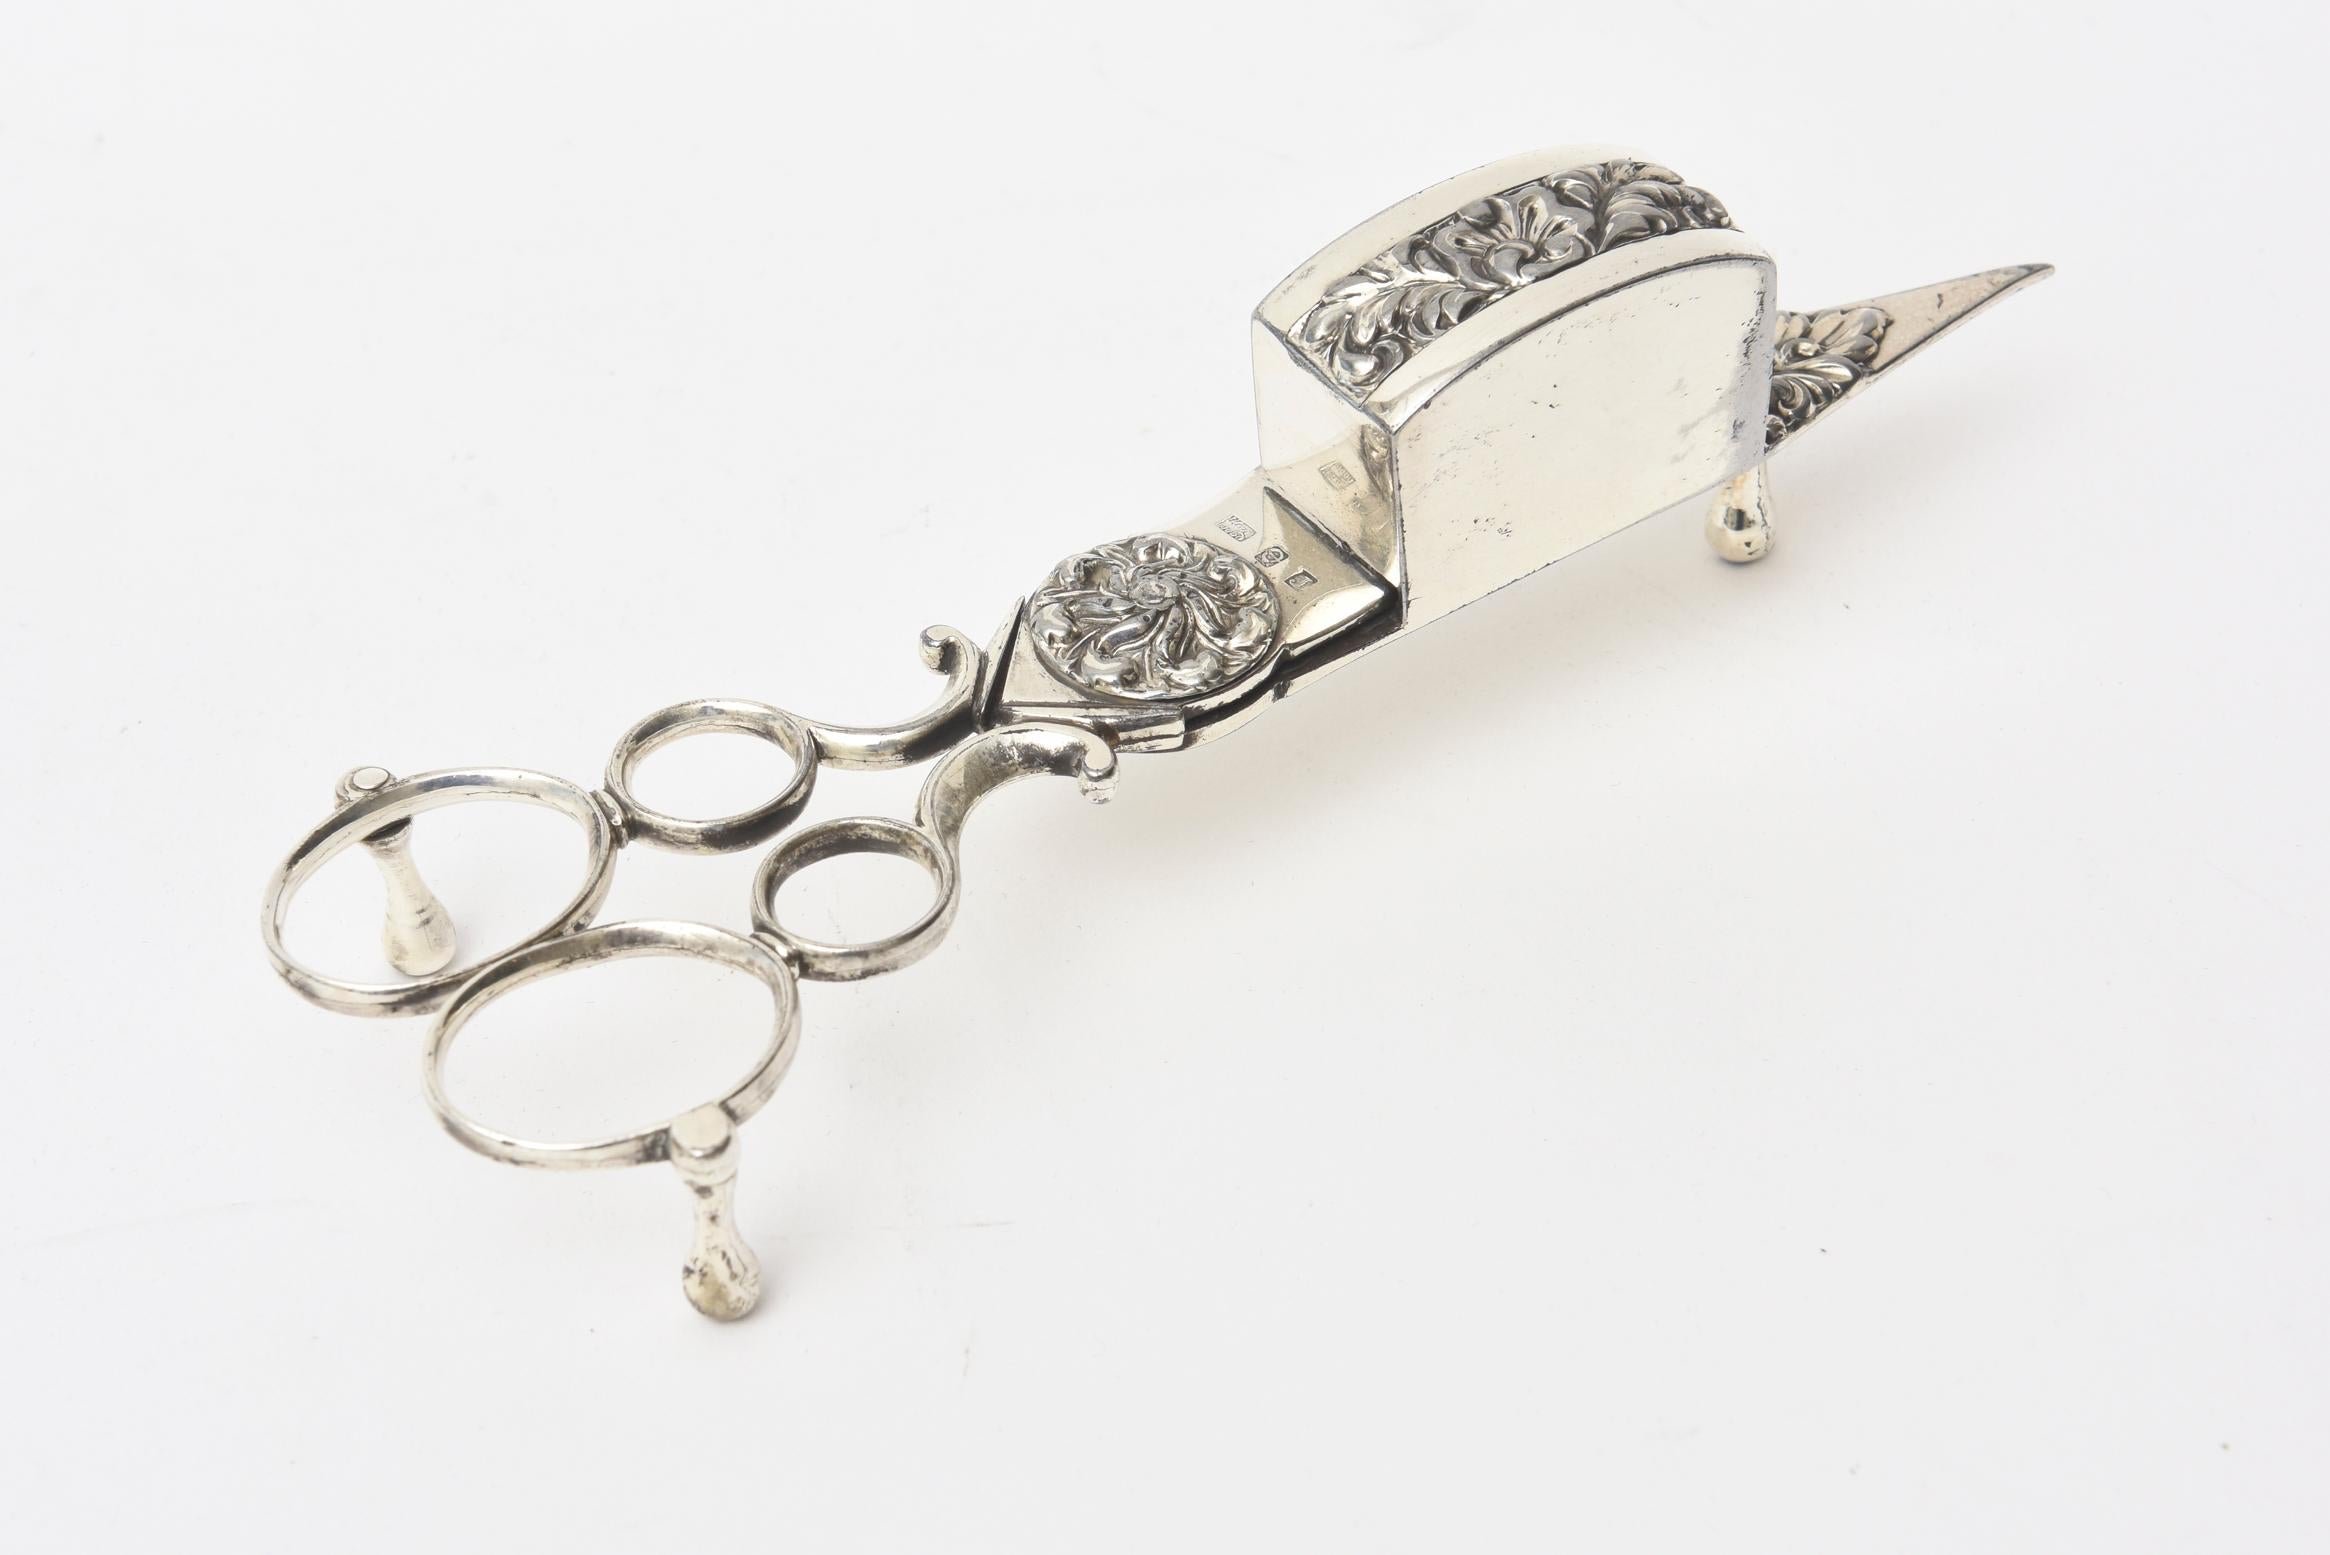 Victorian Silver Candle Snuffer with Tray 19th Century English In Good Condition For Sale In North Miami, FL